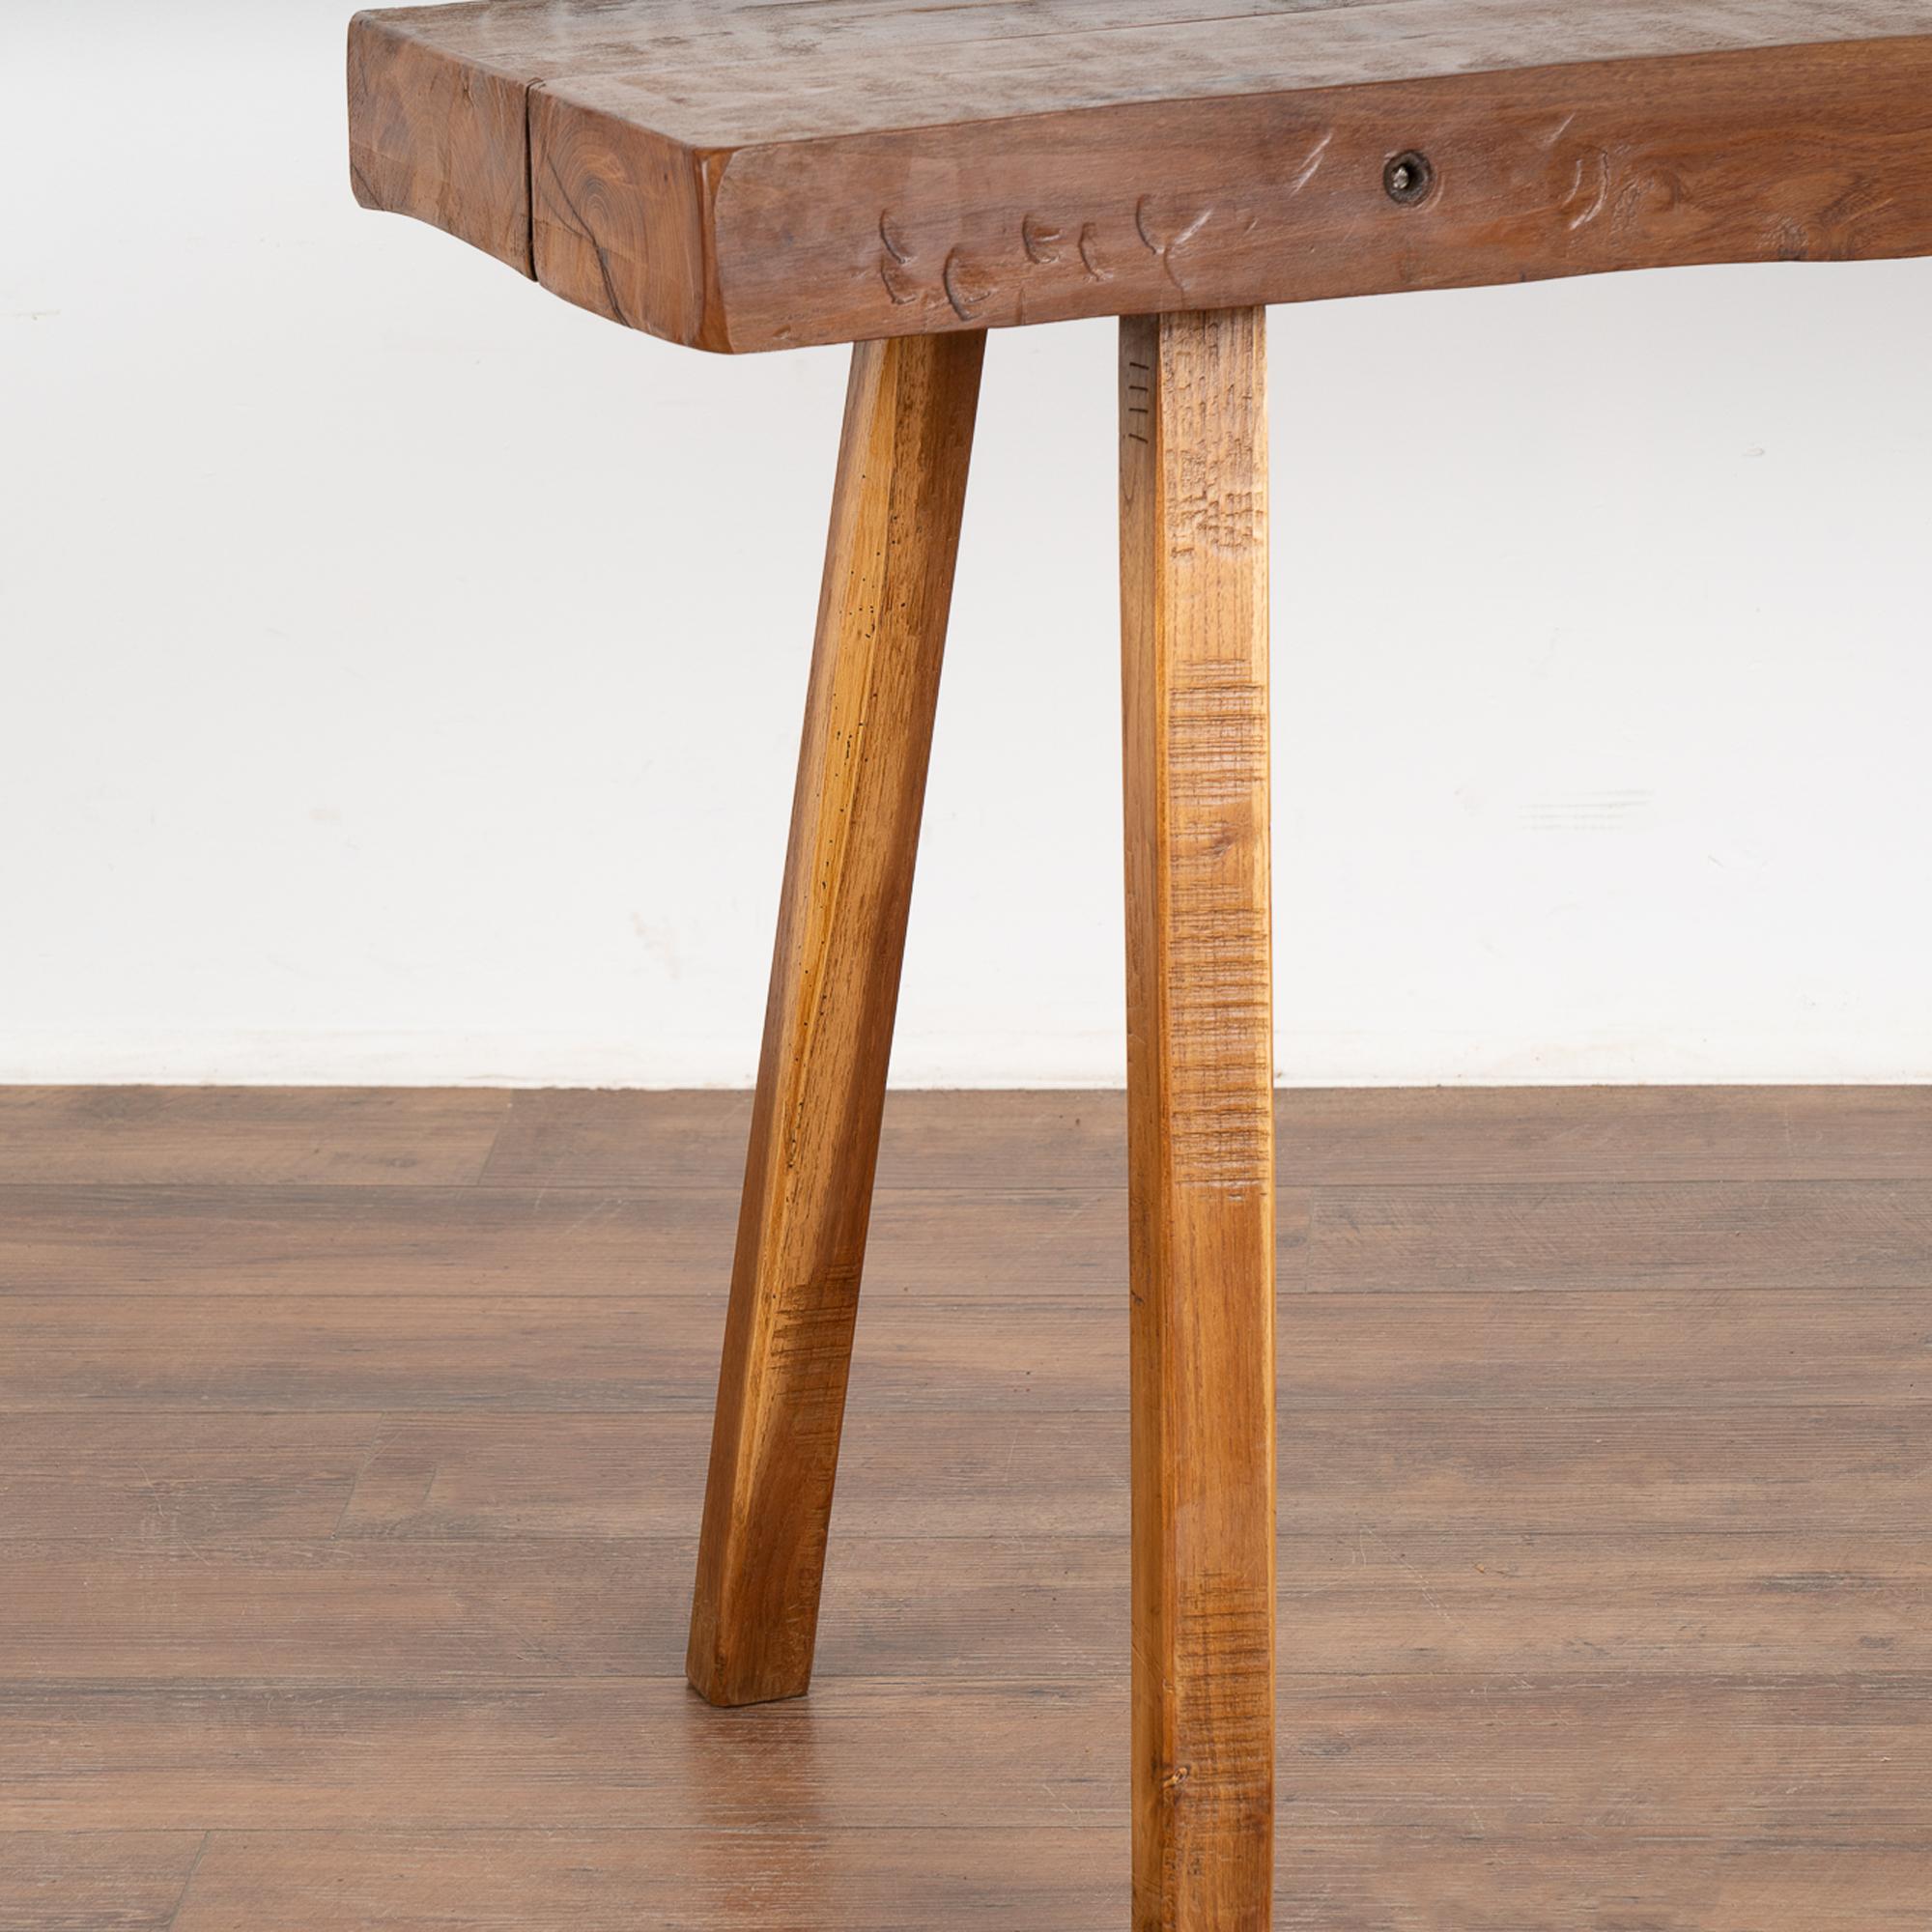 20th Century Rustic Plank Console Table with Peg Legs, Hungary circa 1900's For Sale